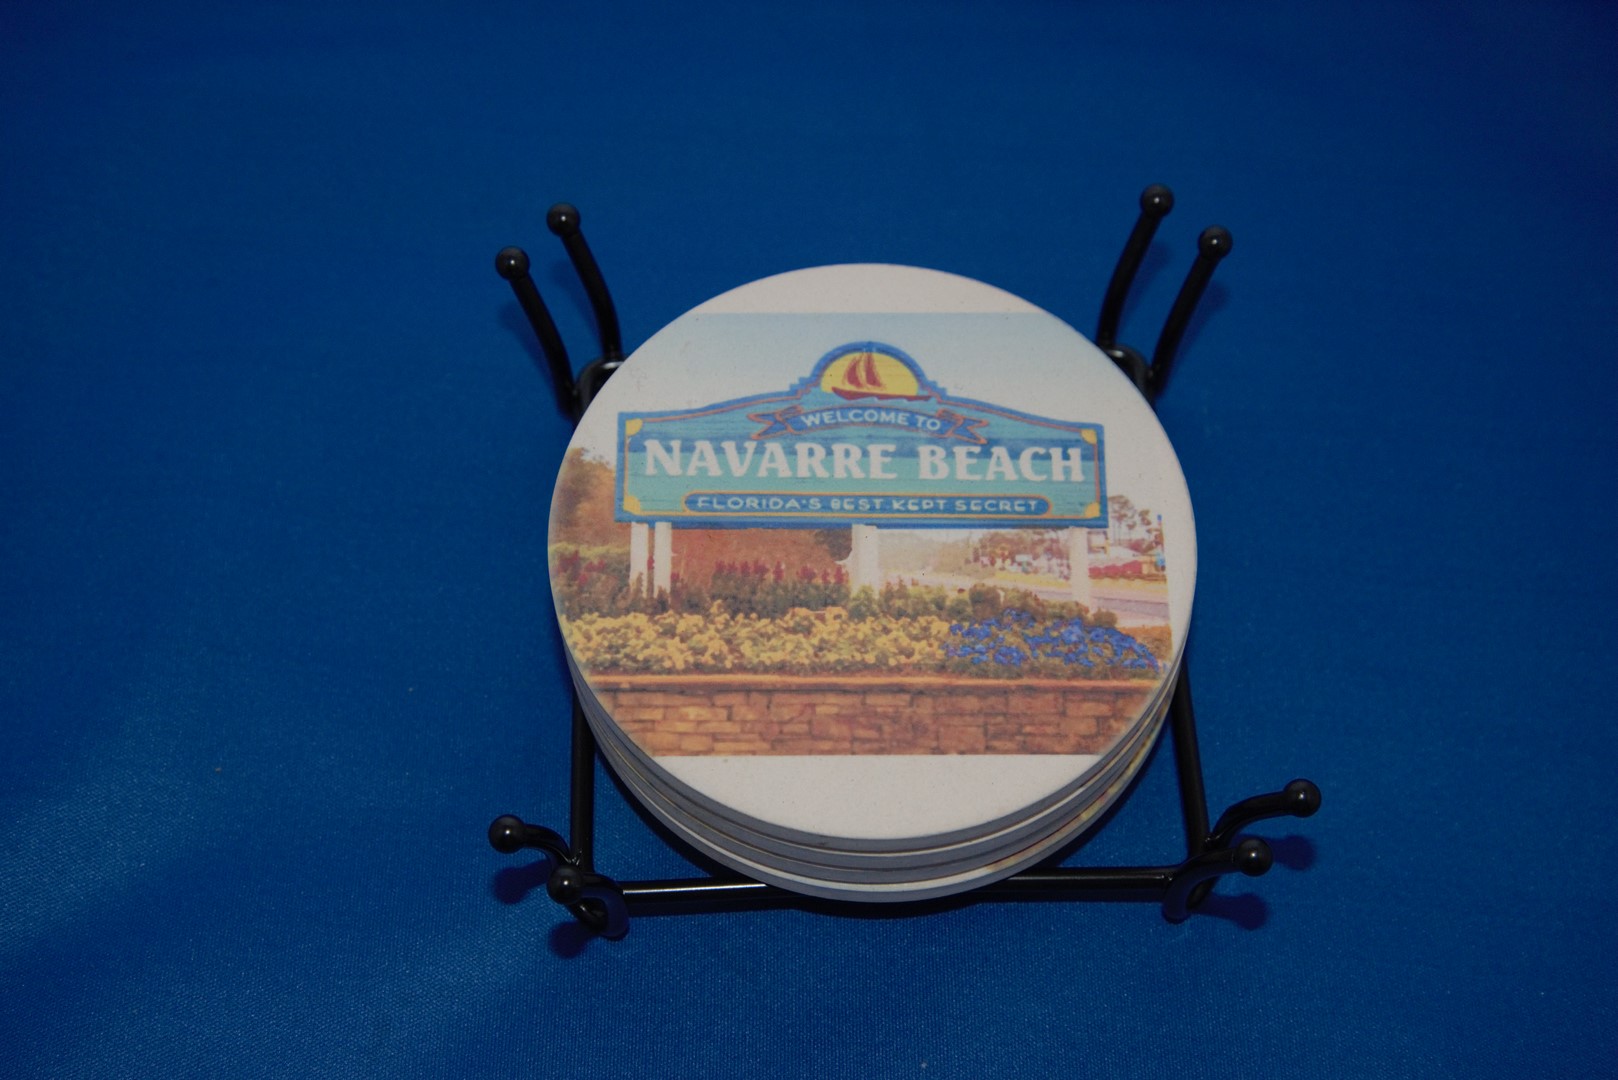 Navarre Beach Coasters made with sublimation printing